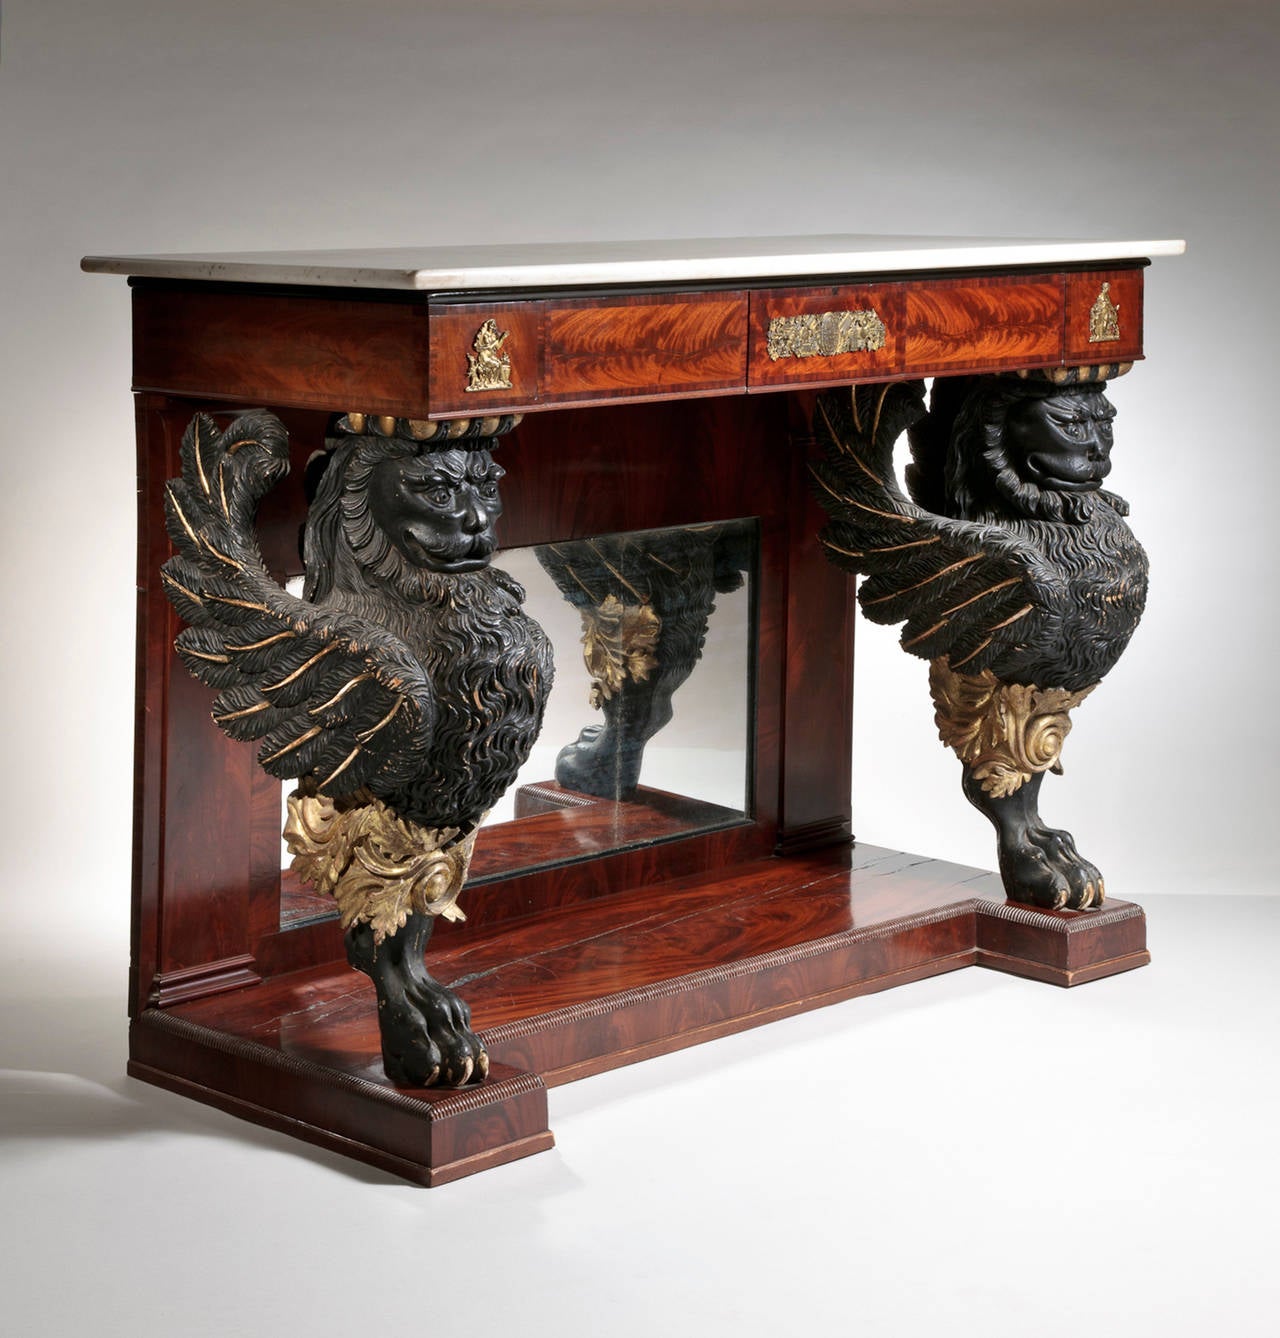 A Philadelphia Empire crotch mahogany veneered marble-top pier table with carved paint and gilt decorated winged lion supports. The Carrara marble top over a frieze of bookmatched crotch mahogany panels, further framed with mahogany crossbanding and